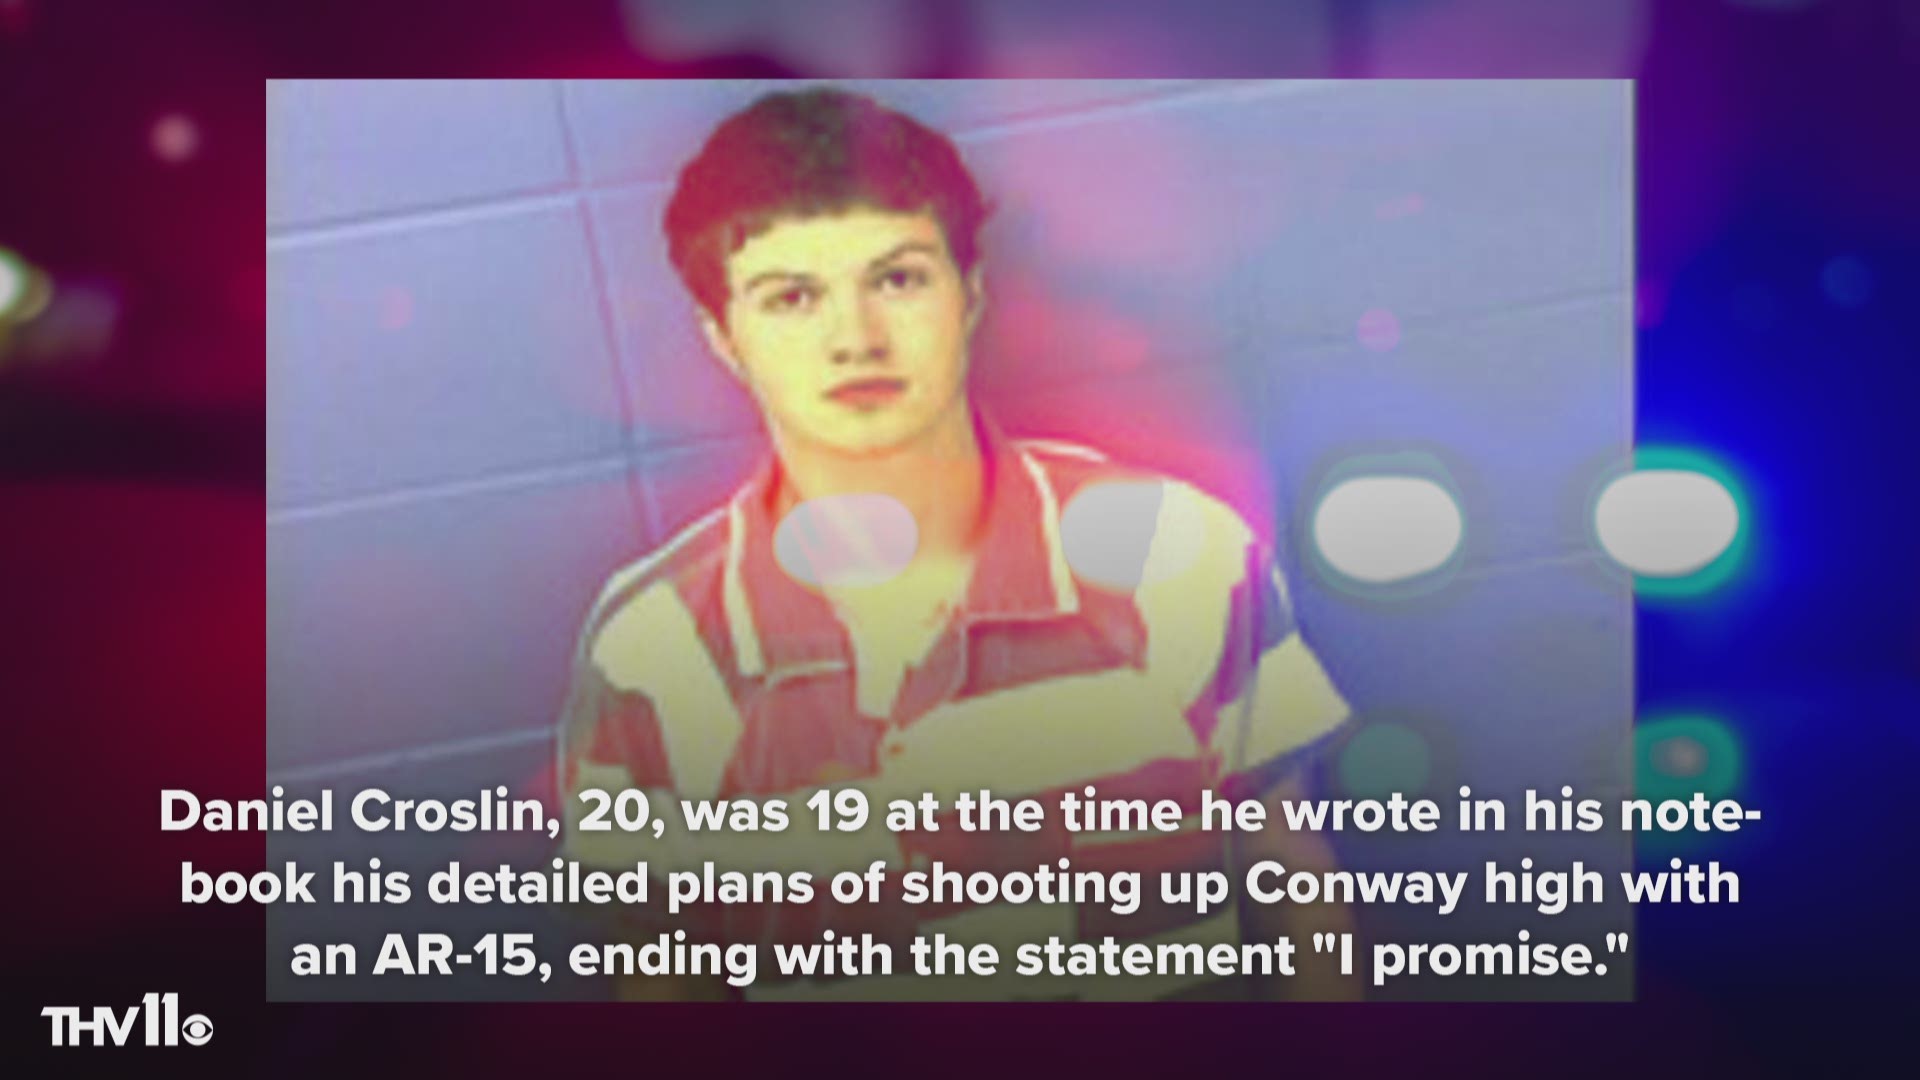 Daniel Croslin, 20, was 19 at the time he wrote in his notebook his detailed plans of shooting up Conway high with an AR-15, ending with the statement "I promise."